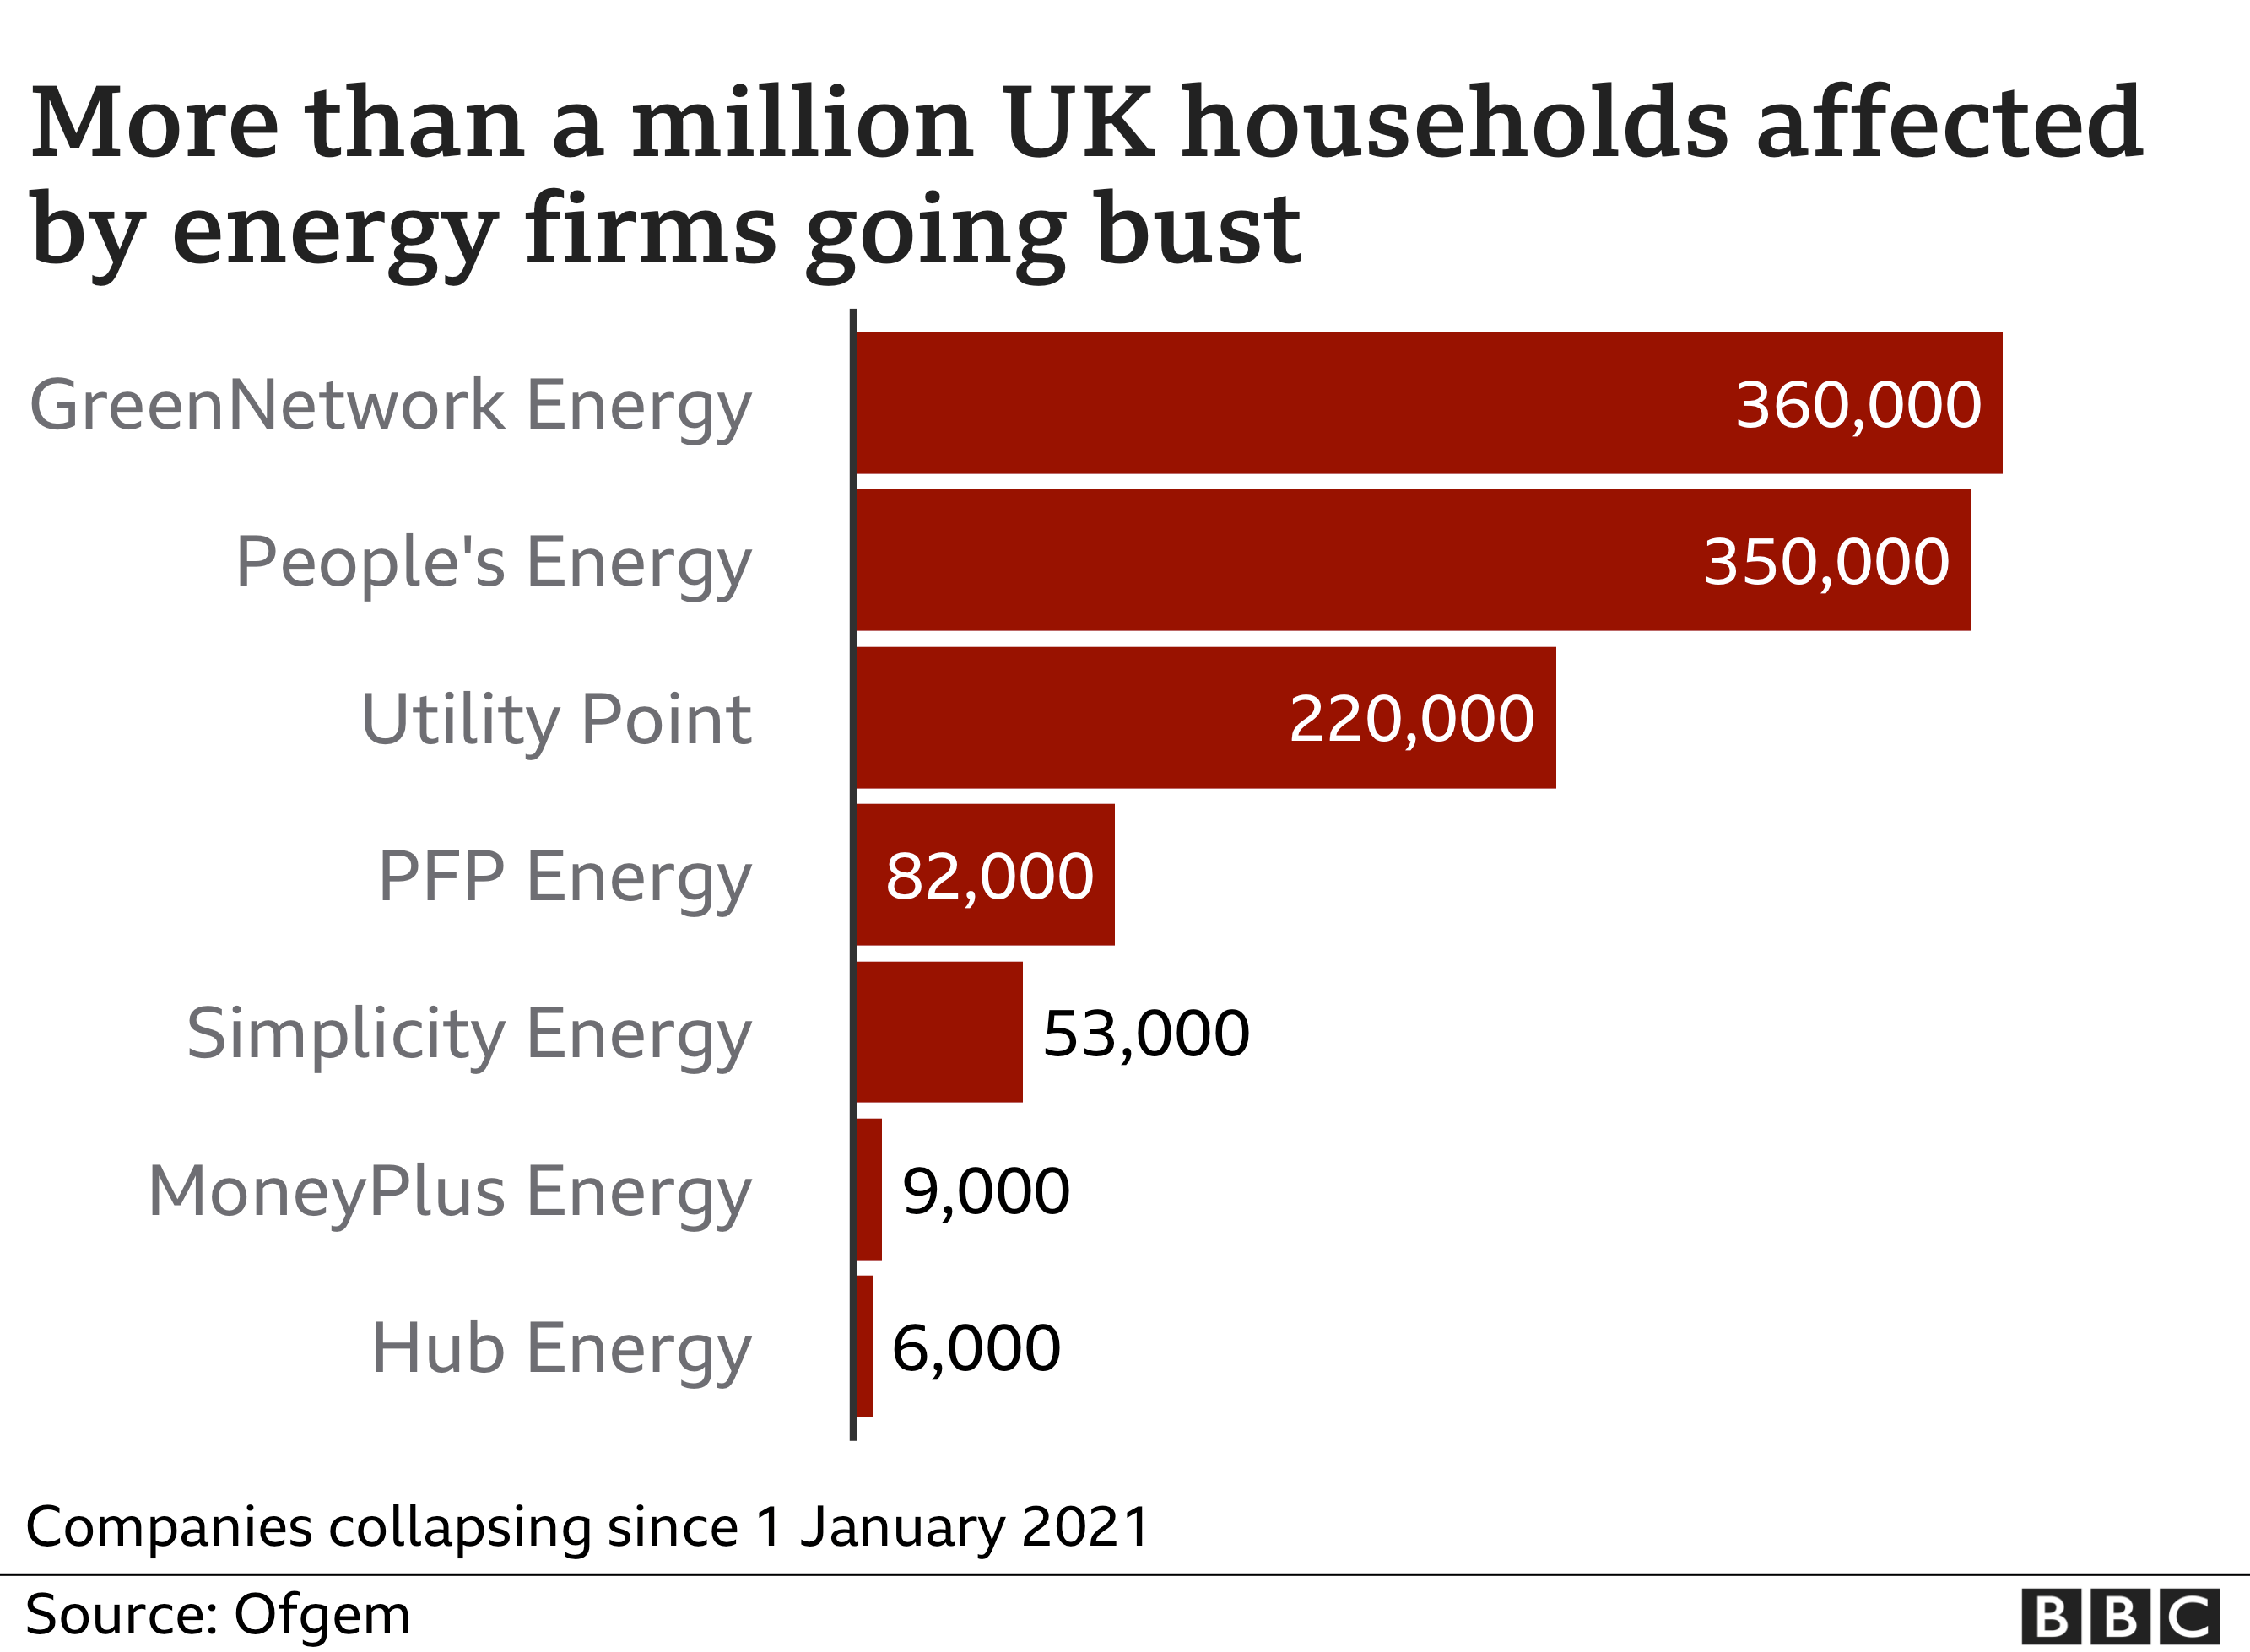 Energy firms going bust BBC and Ofgem 20-9-2021